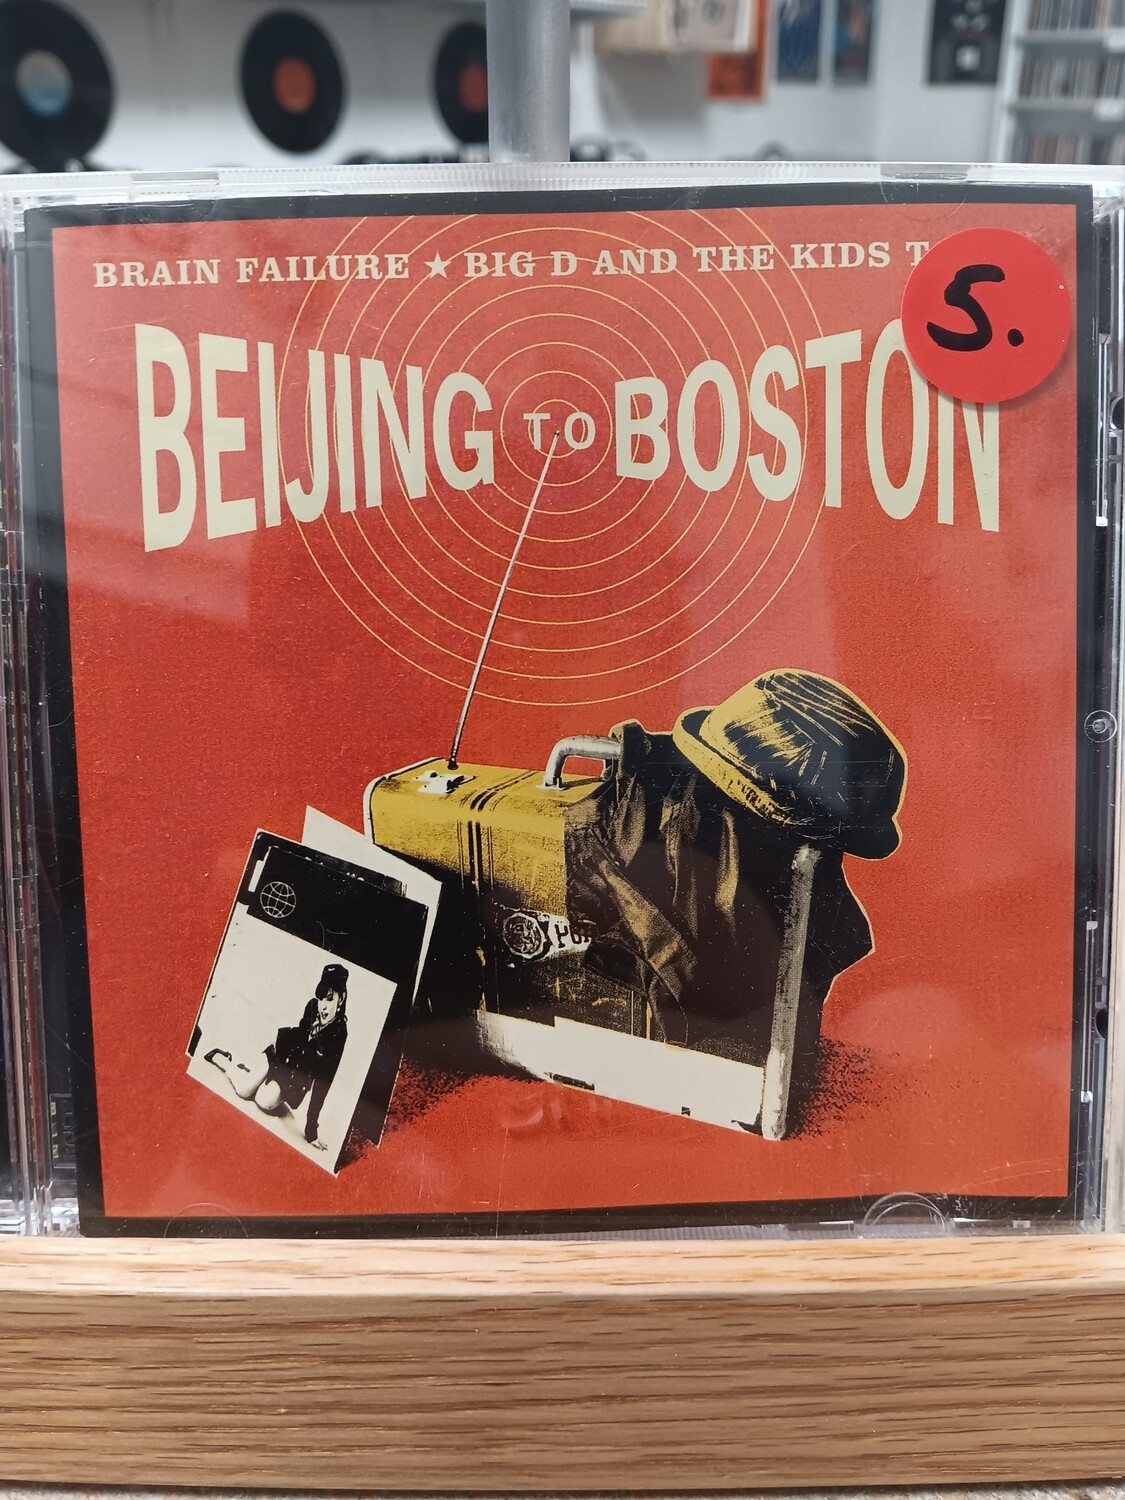 Brain Failure & Big D and The Kids Table - Beijing to Boston (CD)